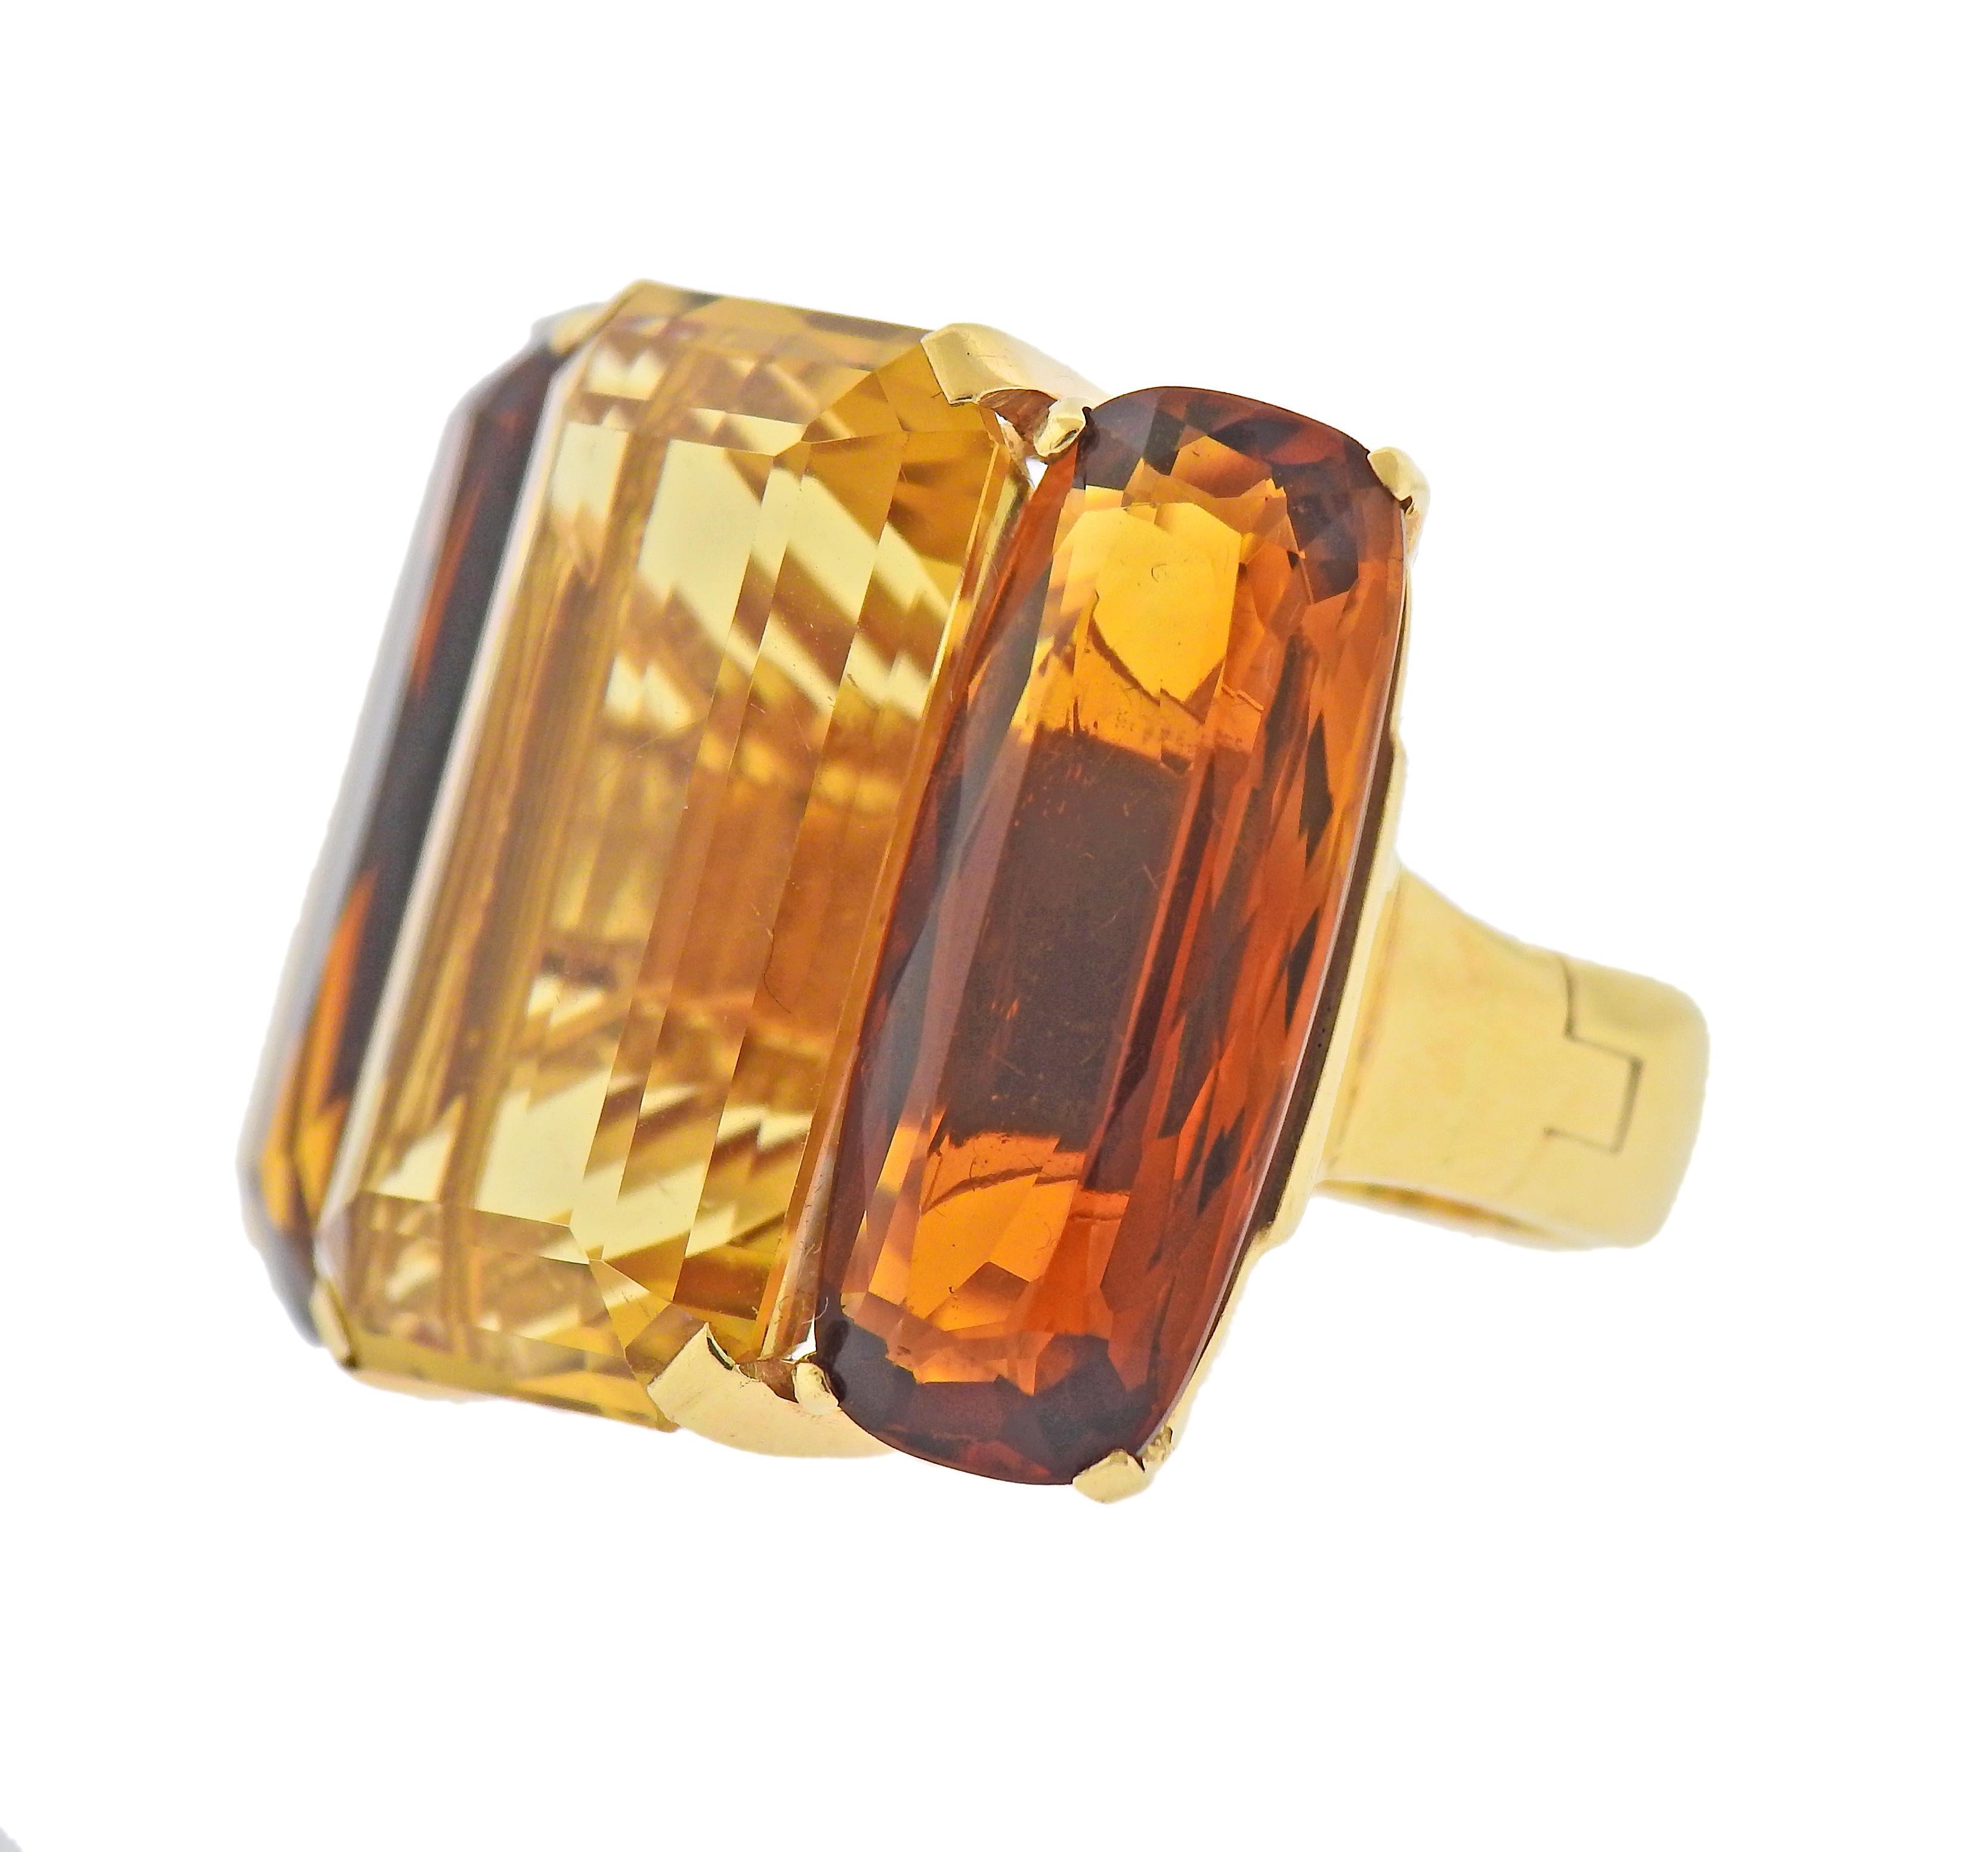 Circa 1950s, Mid century 14k gold cocktail large ring, featuring two tone vitrines. Stones measure approx. 24 x 10.2 x 6.5mm (sides ) and 24.5 x 15 x 10.1mm (center). Ring size - 3.5, ring top is 24.5mm x 34mm. Weight - 25 grams.